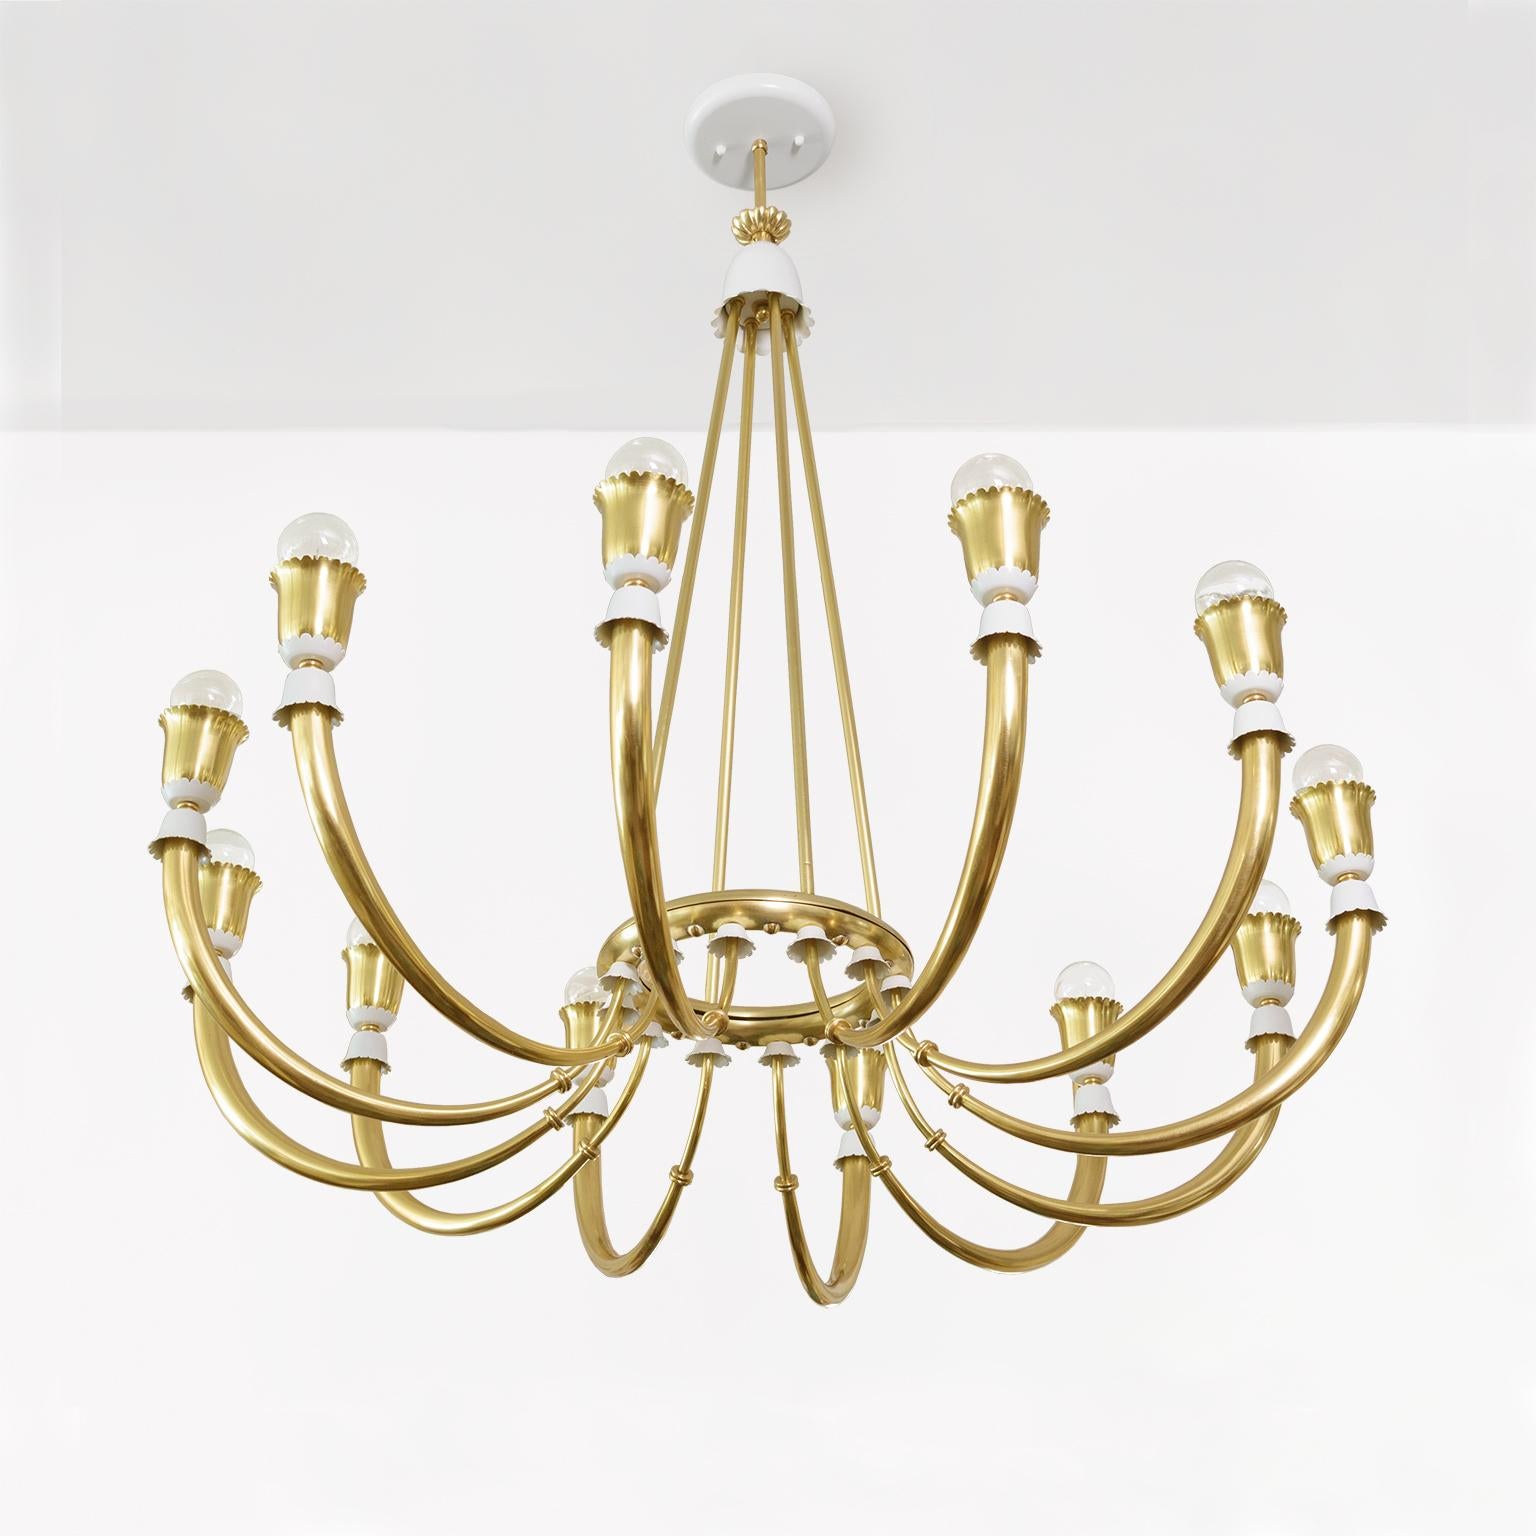 An elegant Scandinavian Modern 12-arm polished brass chandelier. Each arm is detailed with petal shaped caps lacquered in white. The arms converge at a center ring where four brass supports rise to meet a bell shaped cup. A while lacquered metal